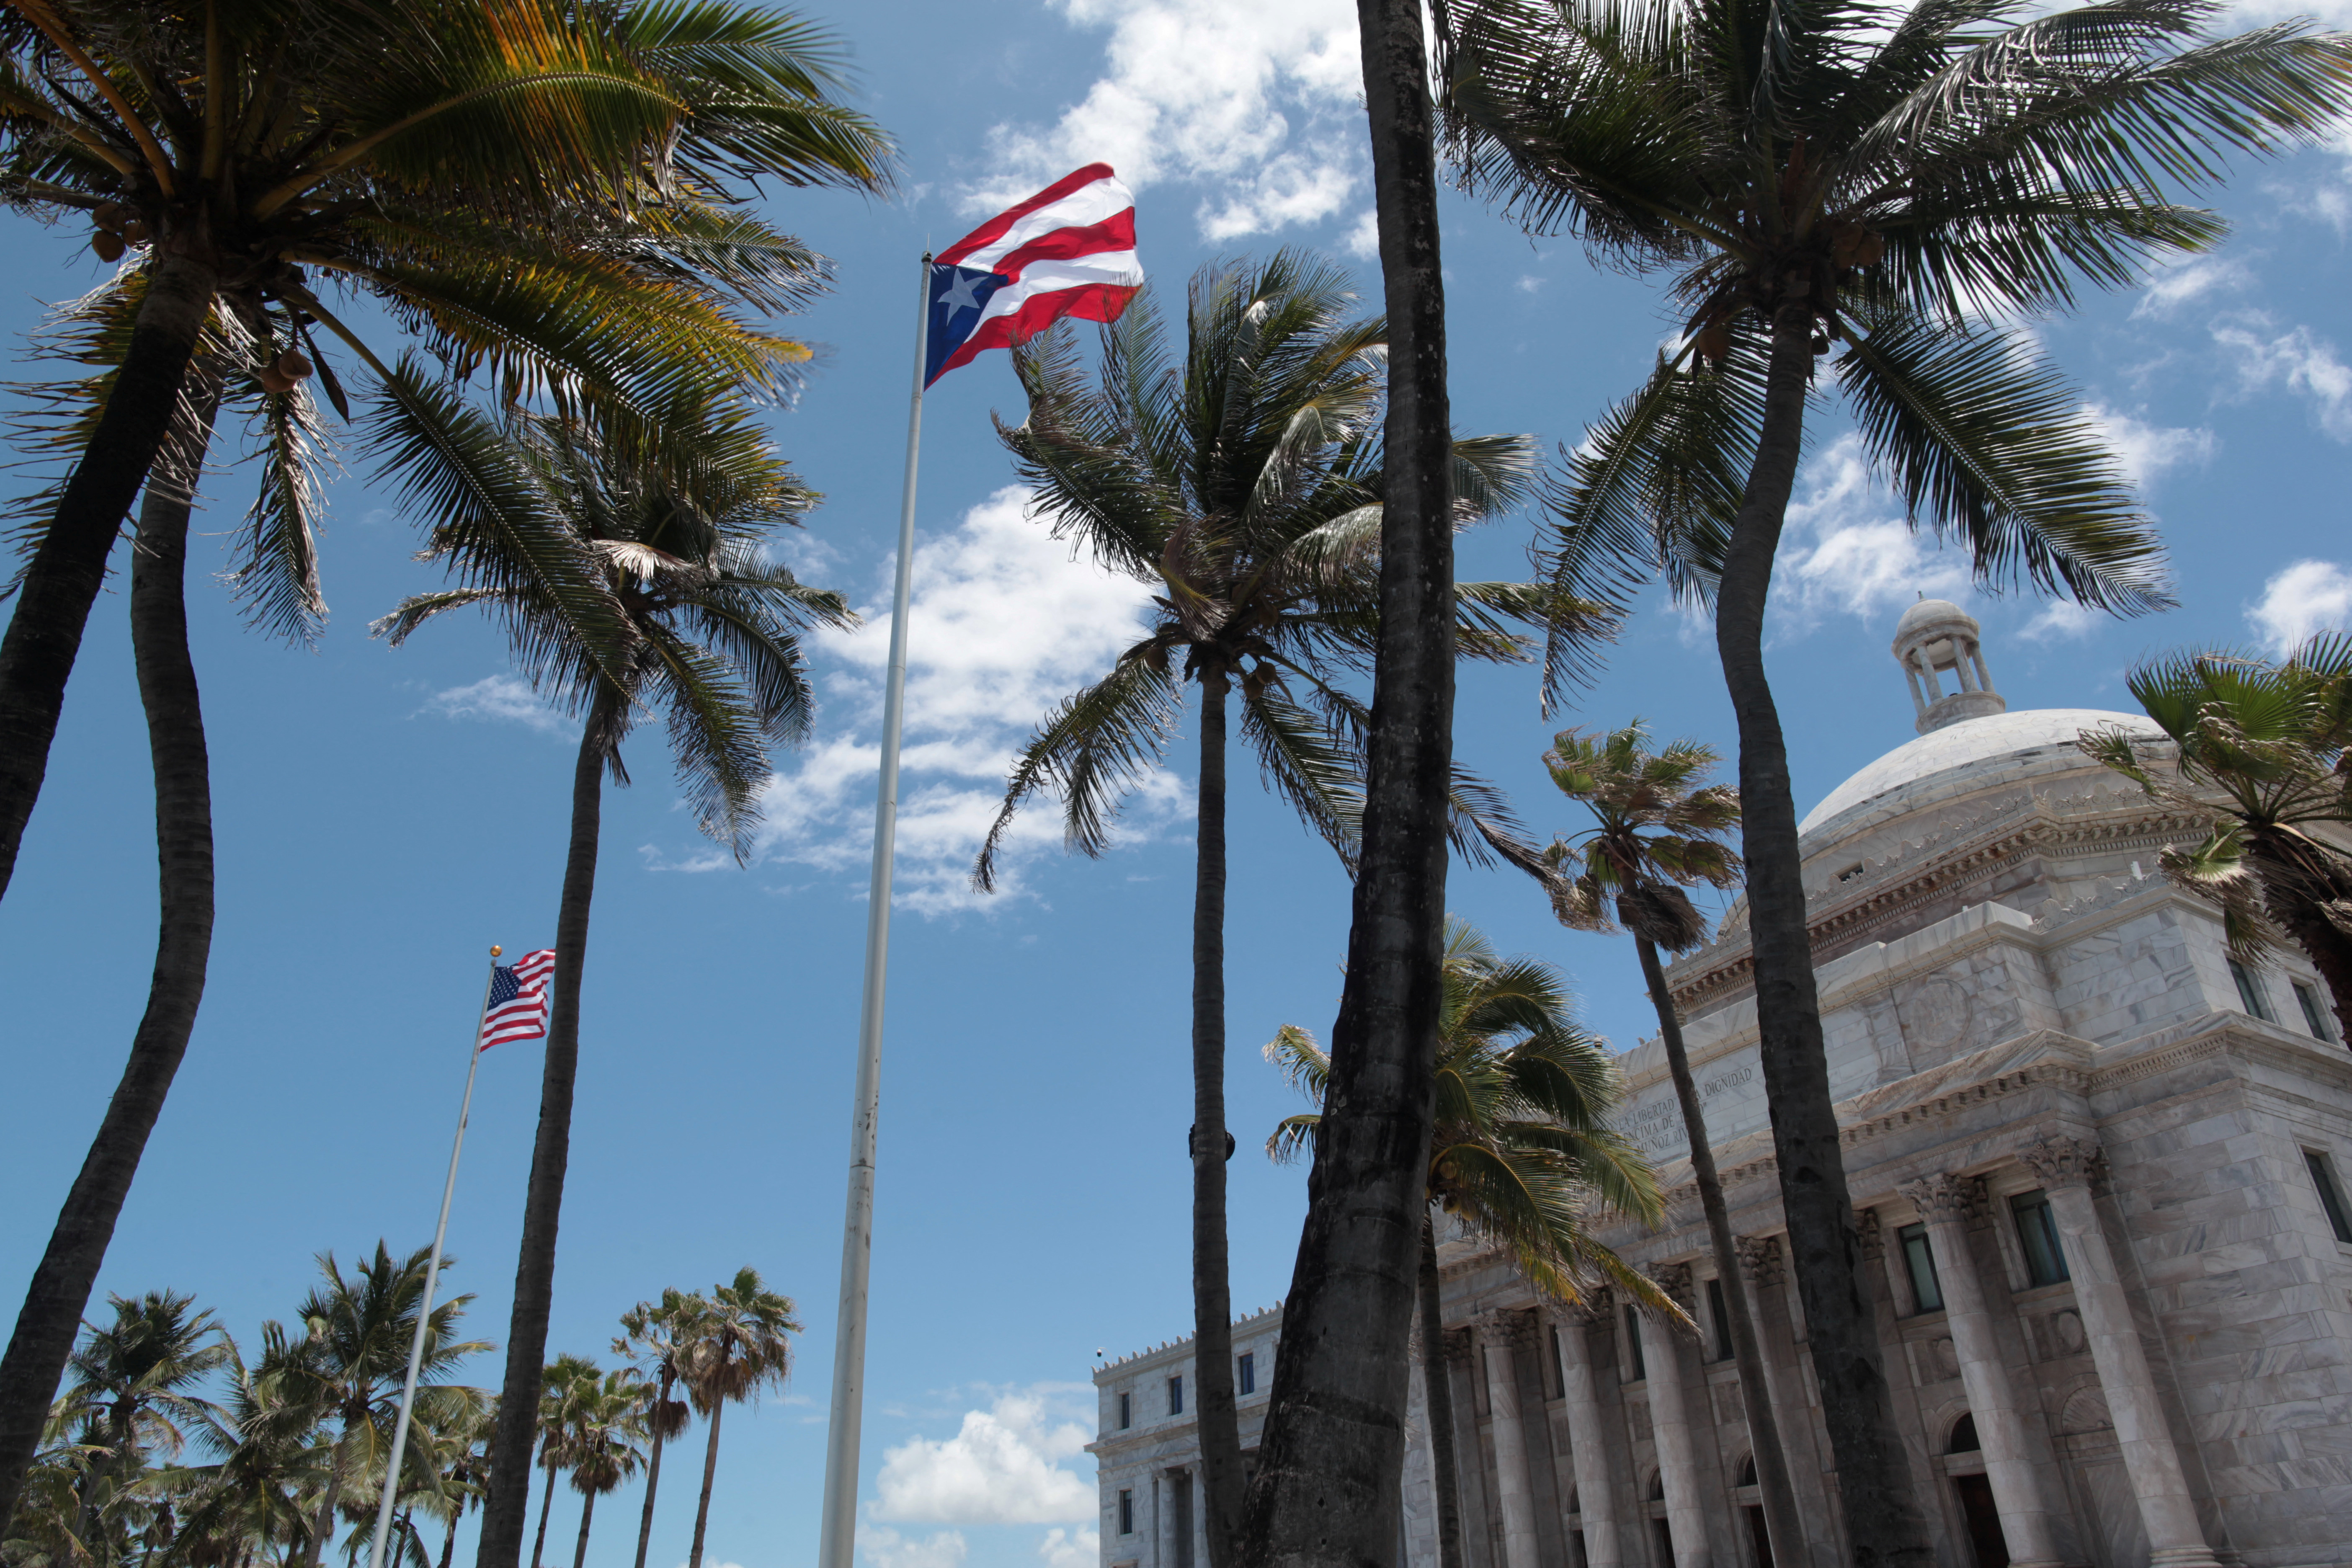 The flags of the U.S. and Puerto Rico fly outside the Capitol building in San Juan